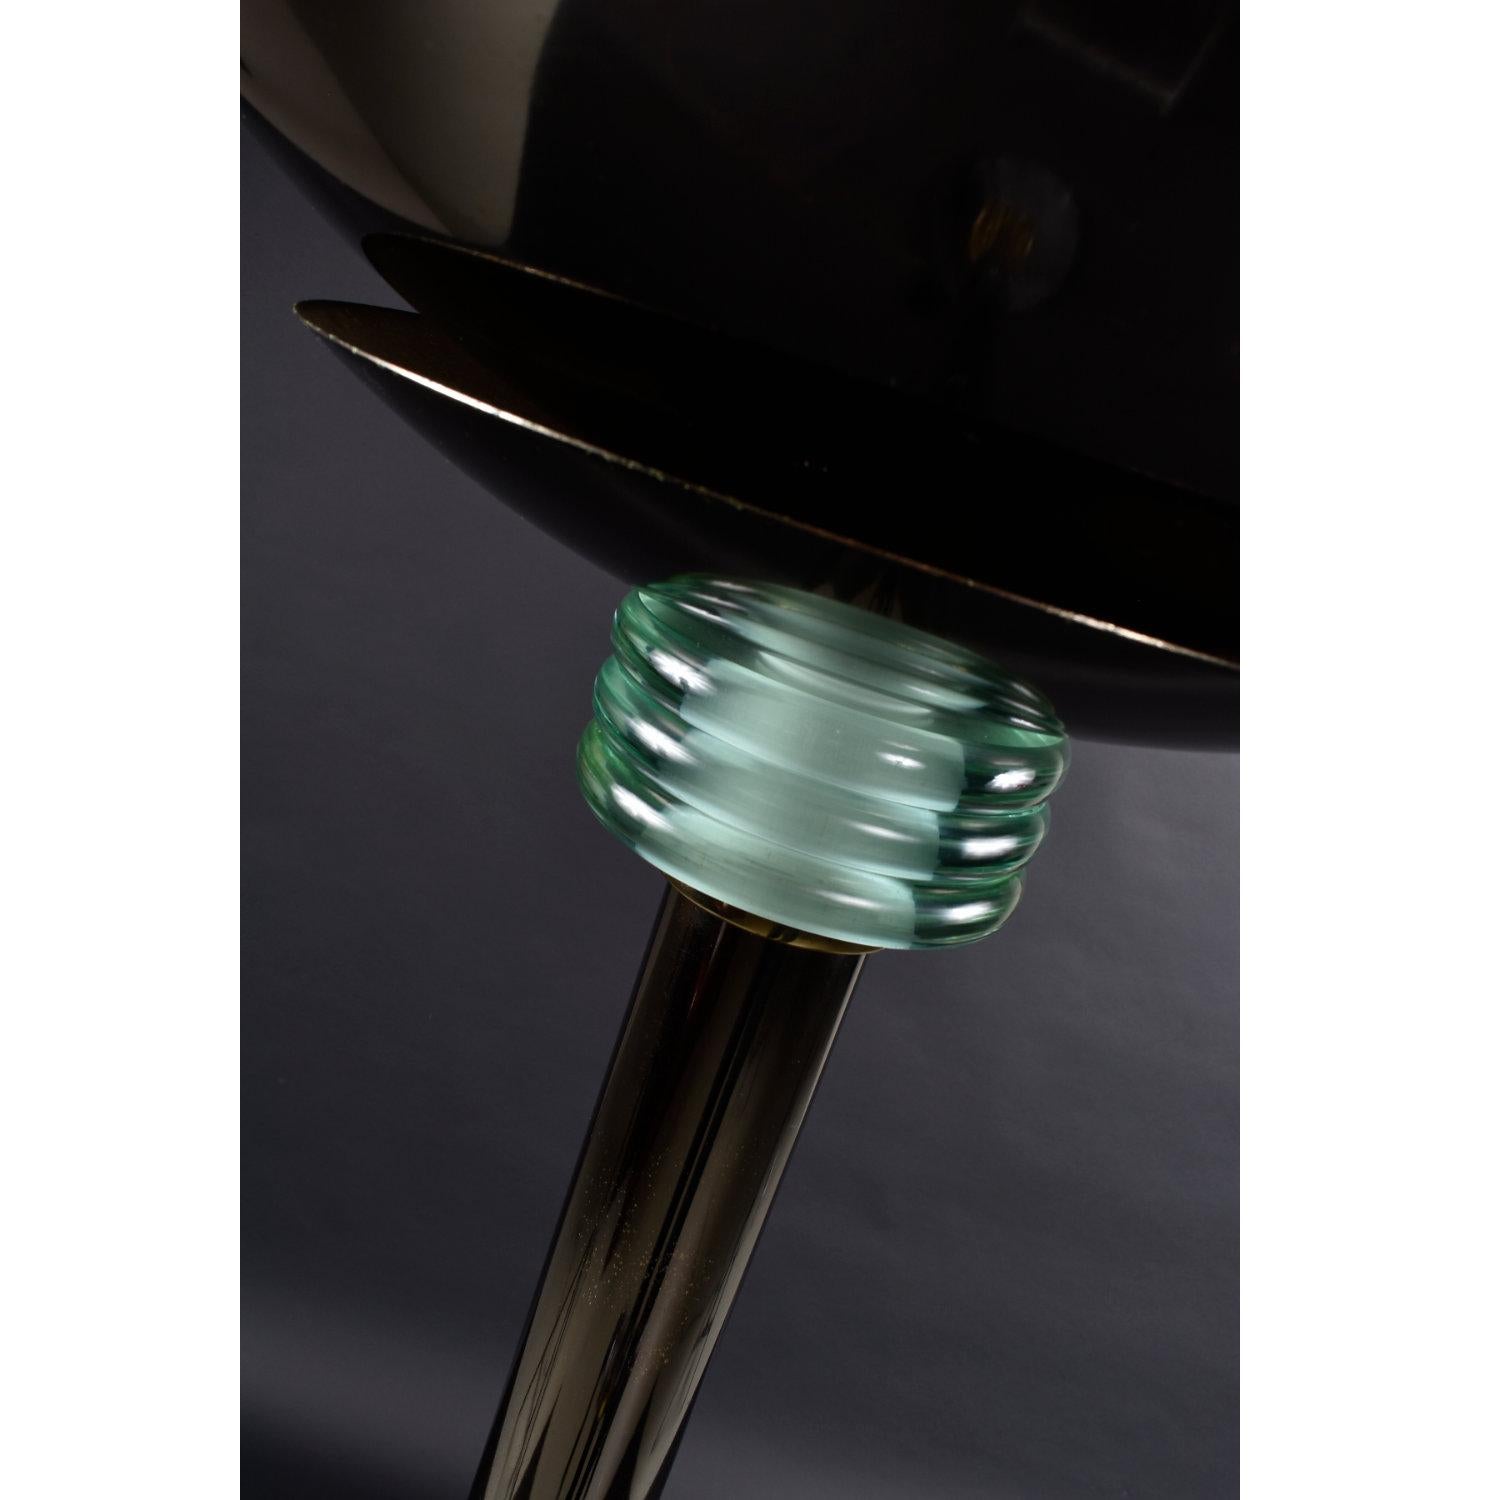 American Casablanca Black and Green Glass Collar Saucer Dimming Torchiere Floor Lamp